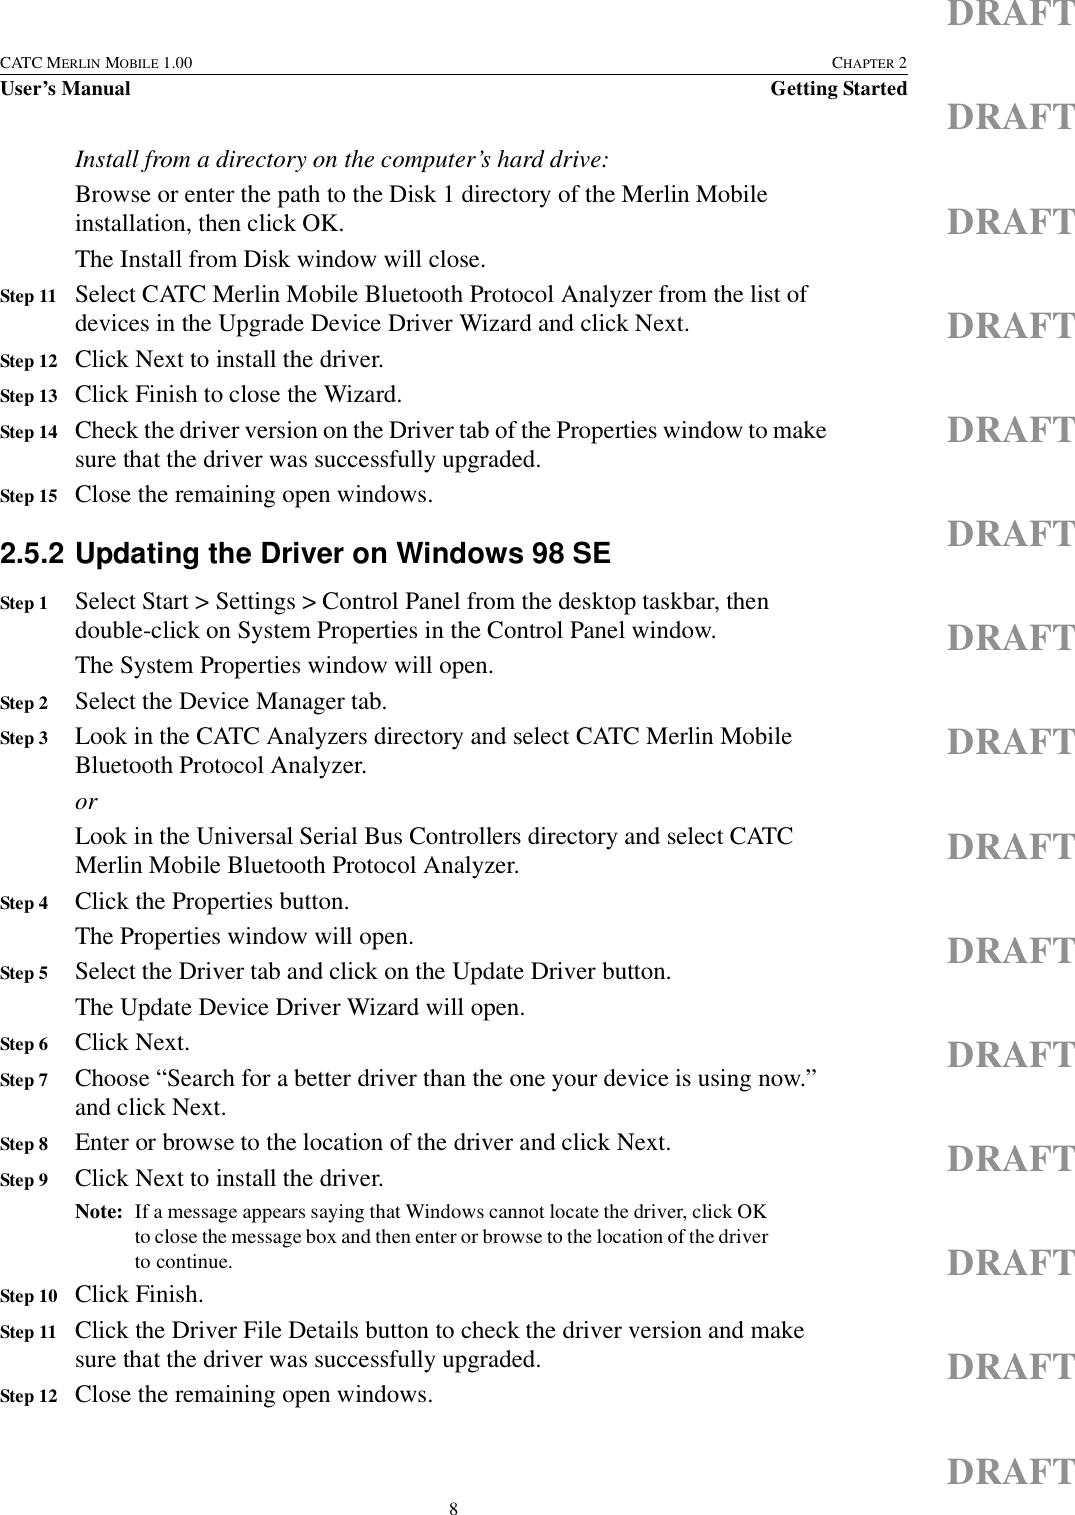 8CATC MERLIN MOBILE 1.00 CHAPTER 2User’s Manual Getting StartedDRAFTDRAFTDRAFTDRAFTDRAFTDRAFTDRAFTDRAFTDRAFTDRAFTDRAFTDRAFTDRAFTDRAFTDRAFTInstall from a directory on the computer’s hard drive:Browse or enter the path to the Disk 1 directory of the Merlin Mobile installation, then click OK.The Install from Disk window will close.Step 11 Select CATC Merlin Mobile Bluetooth Protocol Analyzer from the list of devices in the Upgrade Device Driver Wizard and click Next.Step 12 Click Next to install the driver.Step 13 Click Finish to close the Wizard.Step 14 Check the driver version on the Driver tab of the Properties window to make sure that the driver was successfully upgraded.Step 15 Close the remaining open windows.2.5.2 Updating the Driver on Windows 98 SEStep 1 Select Start &gt; Settings &gt; Control Panel from the desktop taskbar, then double-click on System Properties in the Control Panel window.The System Properties window will open.Step 2 Select the Device Manager tab.Step 3 Look in the CATC Analyzers directory and select CATC Merlin Mobile Bluetooth Protocol Analyzer.orLook in the Universal Serial Bus Controllers directory and select CATC Merlin Mobile Bluetooth Protocol Analyzer.Step 4 Click the Properties button.The Properties window will open.Step 5 Select the Driver tab and click on the Update Driver button.The Update Device Driver Wizard will open.Step 6 Click Next.Step 7 Choose “Search for a better driver than the one your device is using now.” and click Next.Step 8 Enter or browse to the location of the driver and click Next.Step 9 Click Next to install the driver.Note: If a message appears saying that Windows cannot locate the driver, click OK to close the message box and then enter or browse to the location of the driver to continue.Step 10 Click Finish.Step 11 Click the Driver File Details button to check the driver version and make sure that the driver was successfully upgraded.Step 12 Close the remaining open windows.